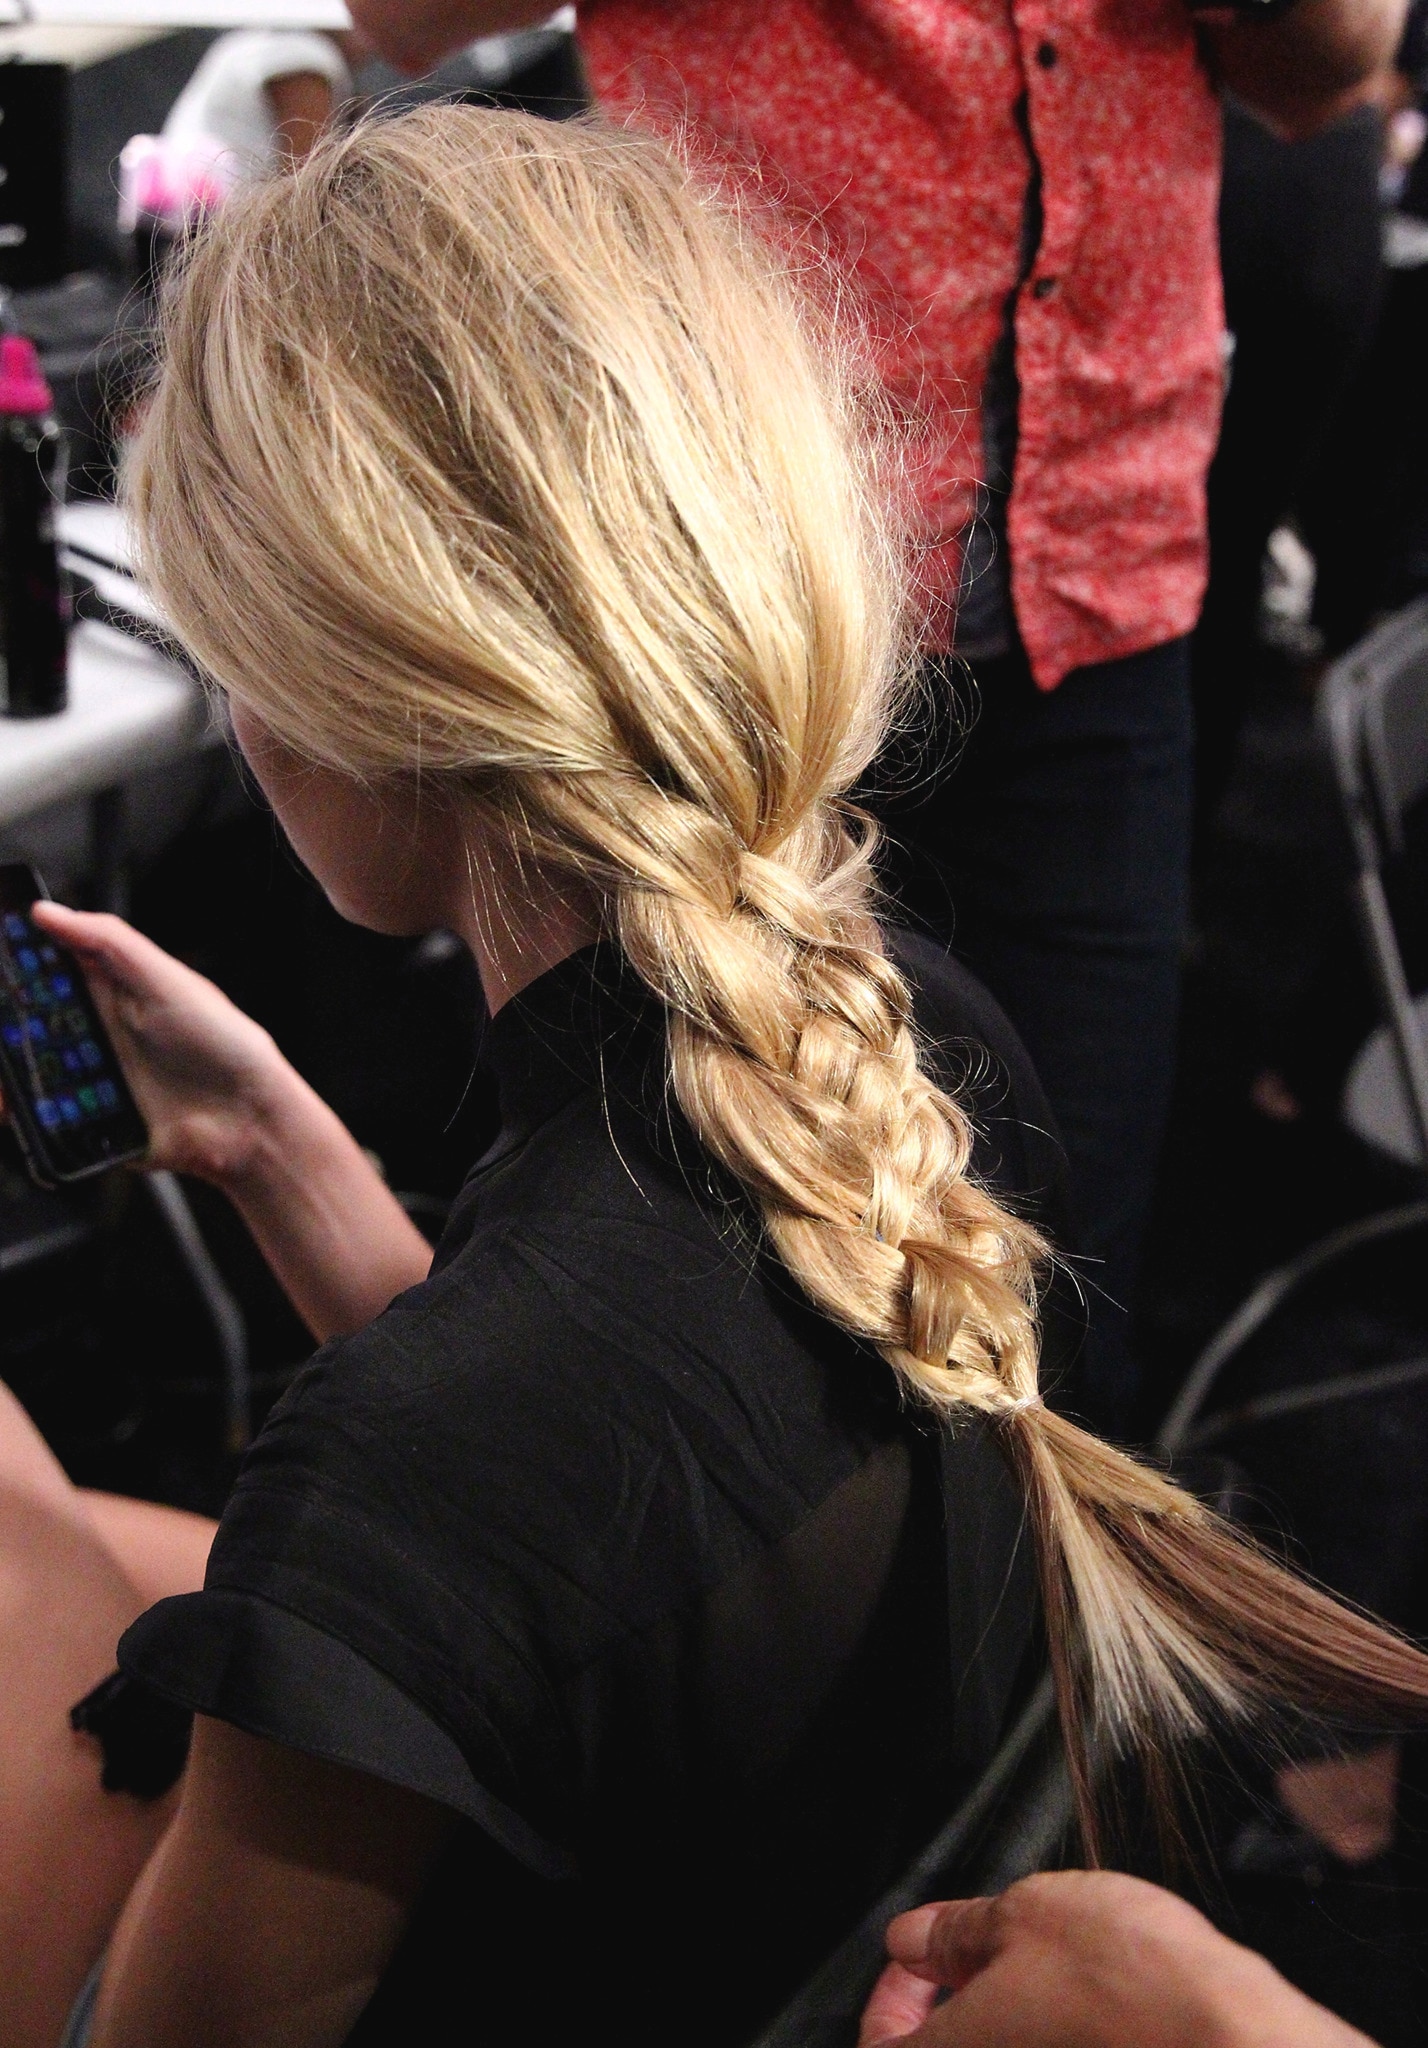 A blonde model sitting down backstage with her hair in a long, thick braid.